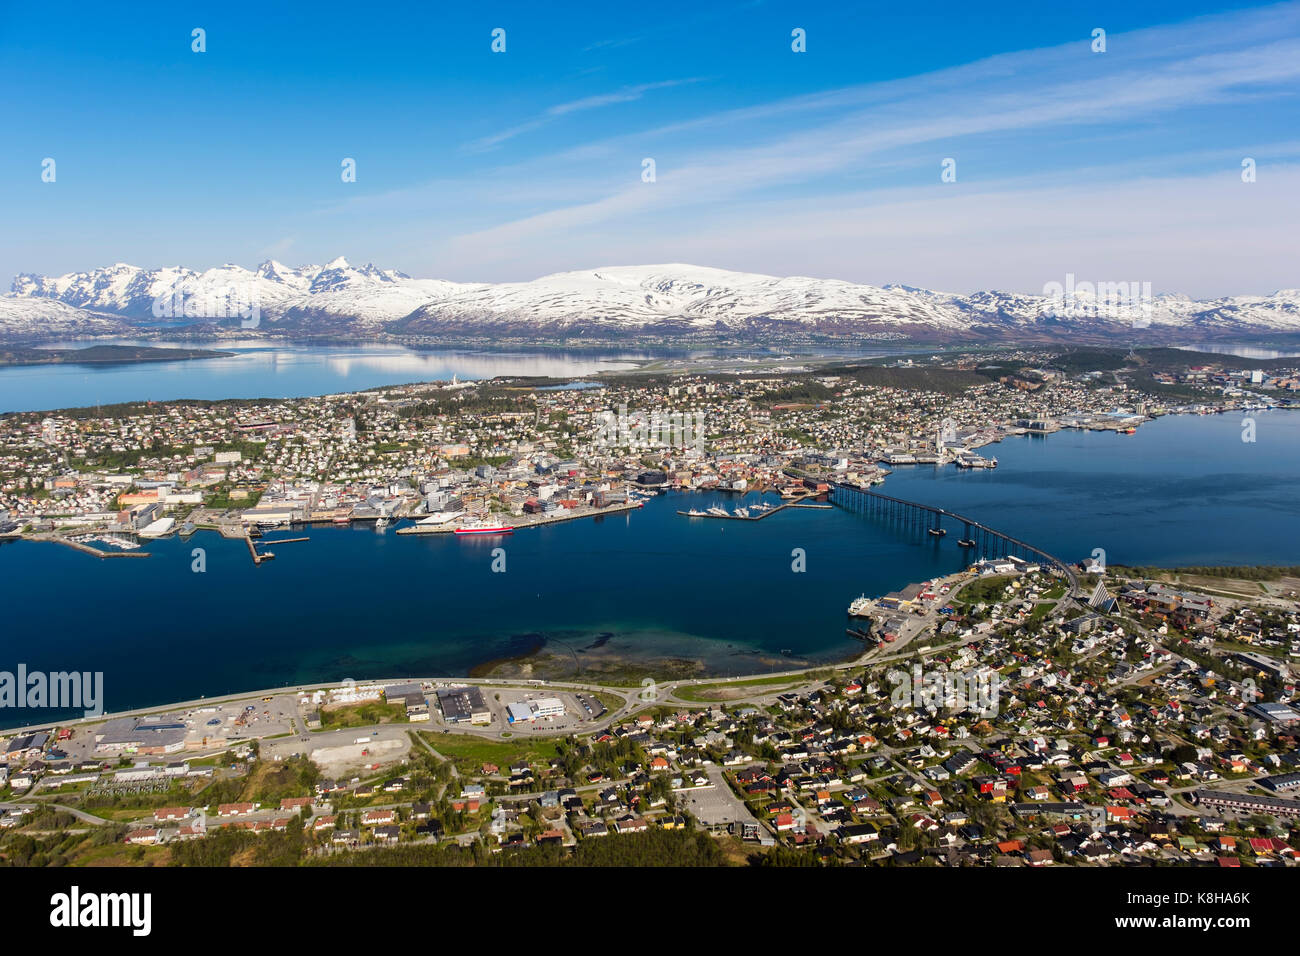 High view above city on Tromsoya island with snow-capped distant mountains seen from Mount Storsteinen. Tromso, Troms, Norway, Scandinavia Stock Photo